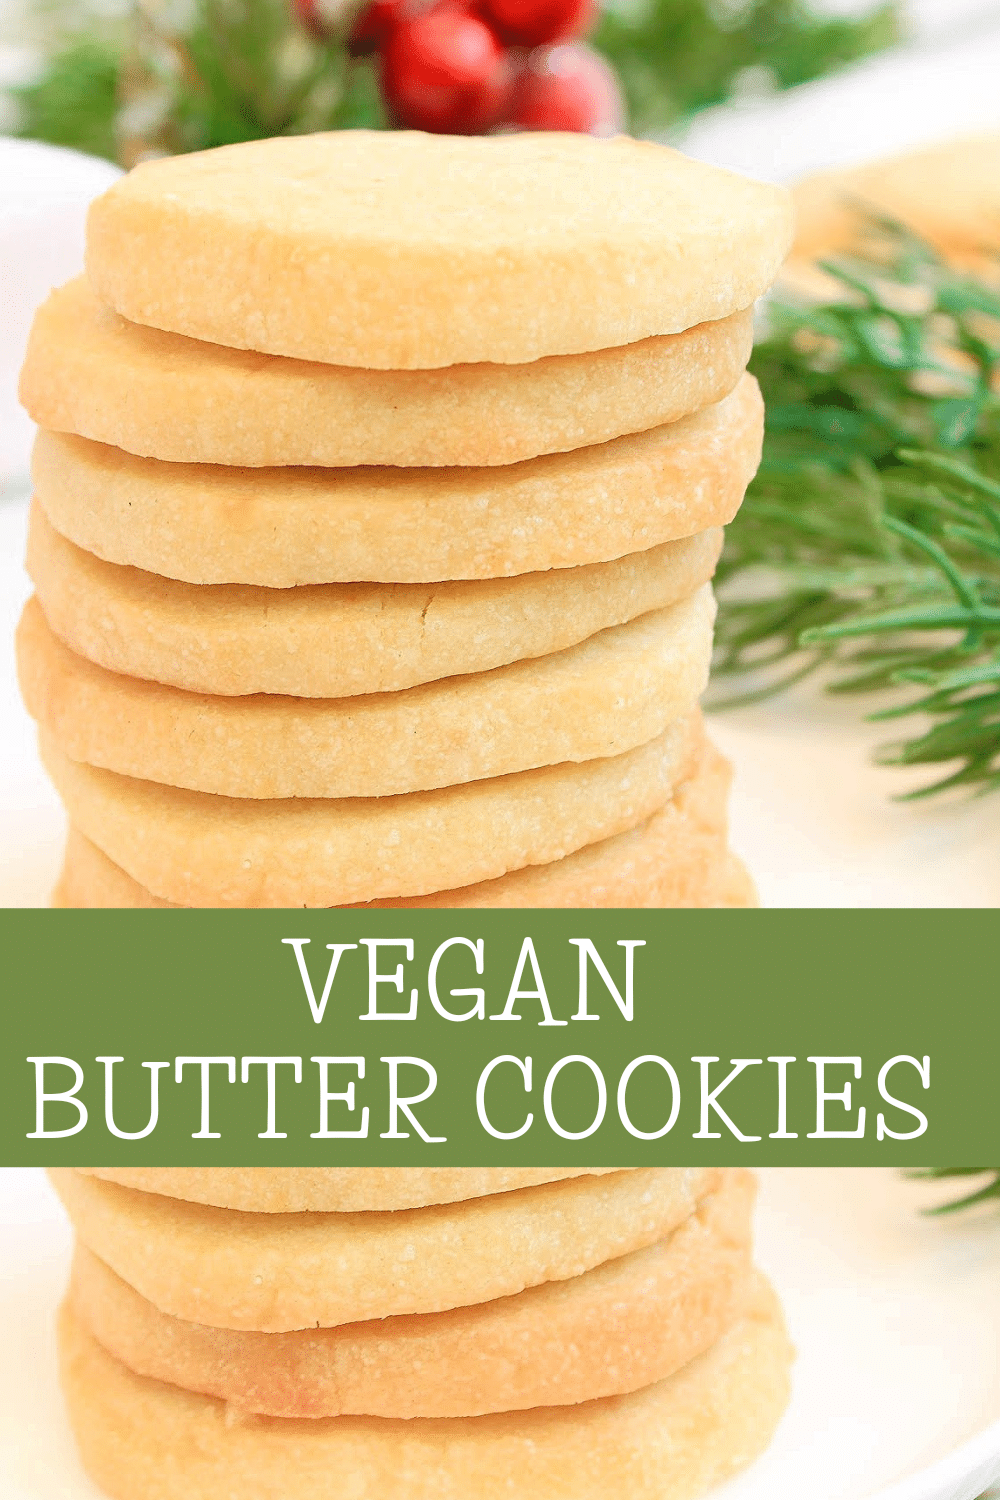 Vegan Butter Cookies ~ 4 ingredients are all you need for these easy slice-and-bake cookies! Perfect for afternoon tea or holiday cookie tins! via @thiswifecooks